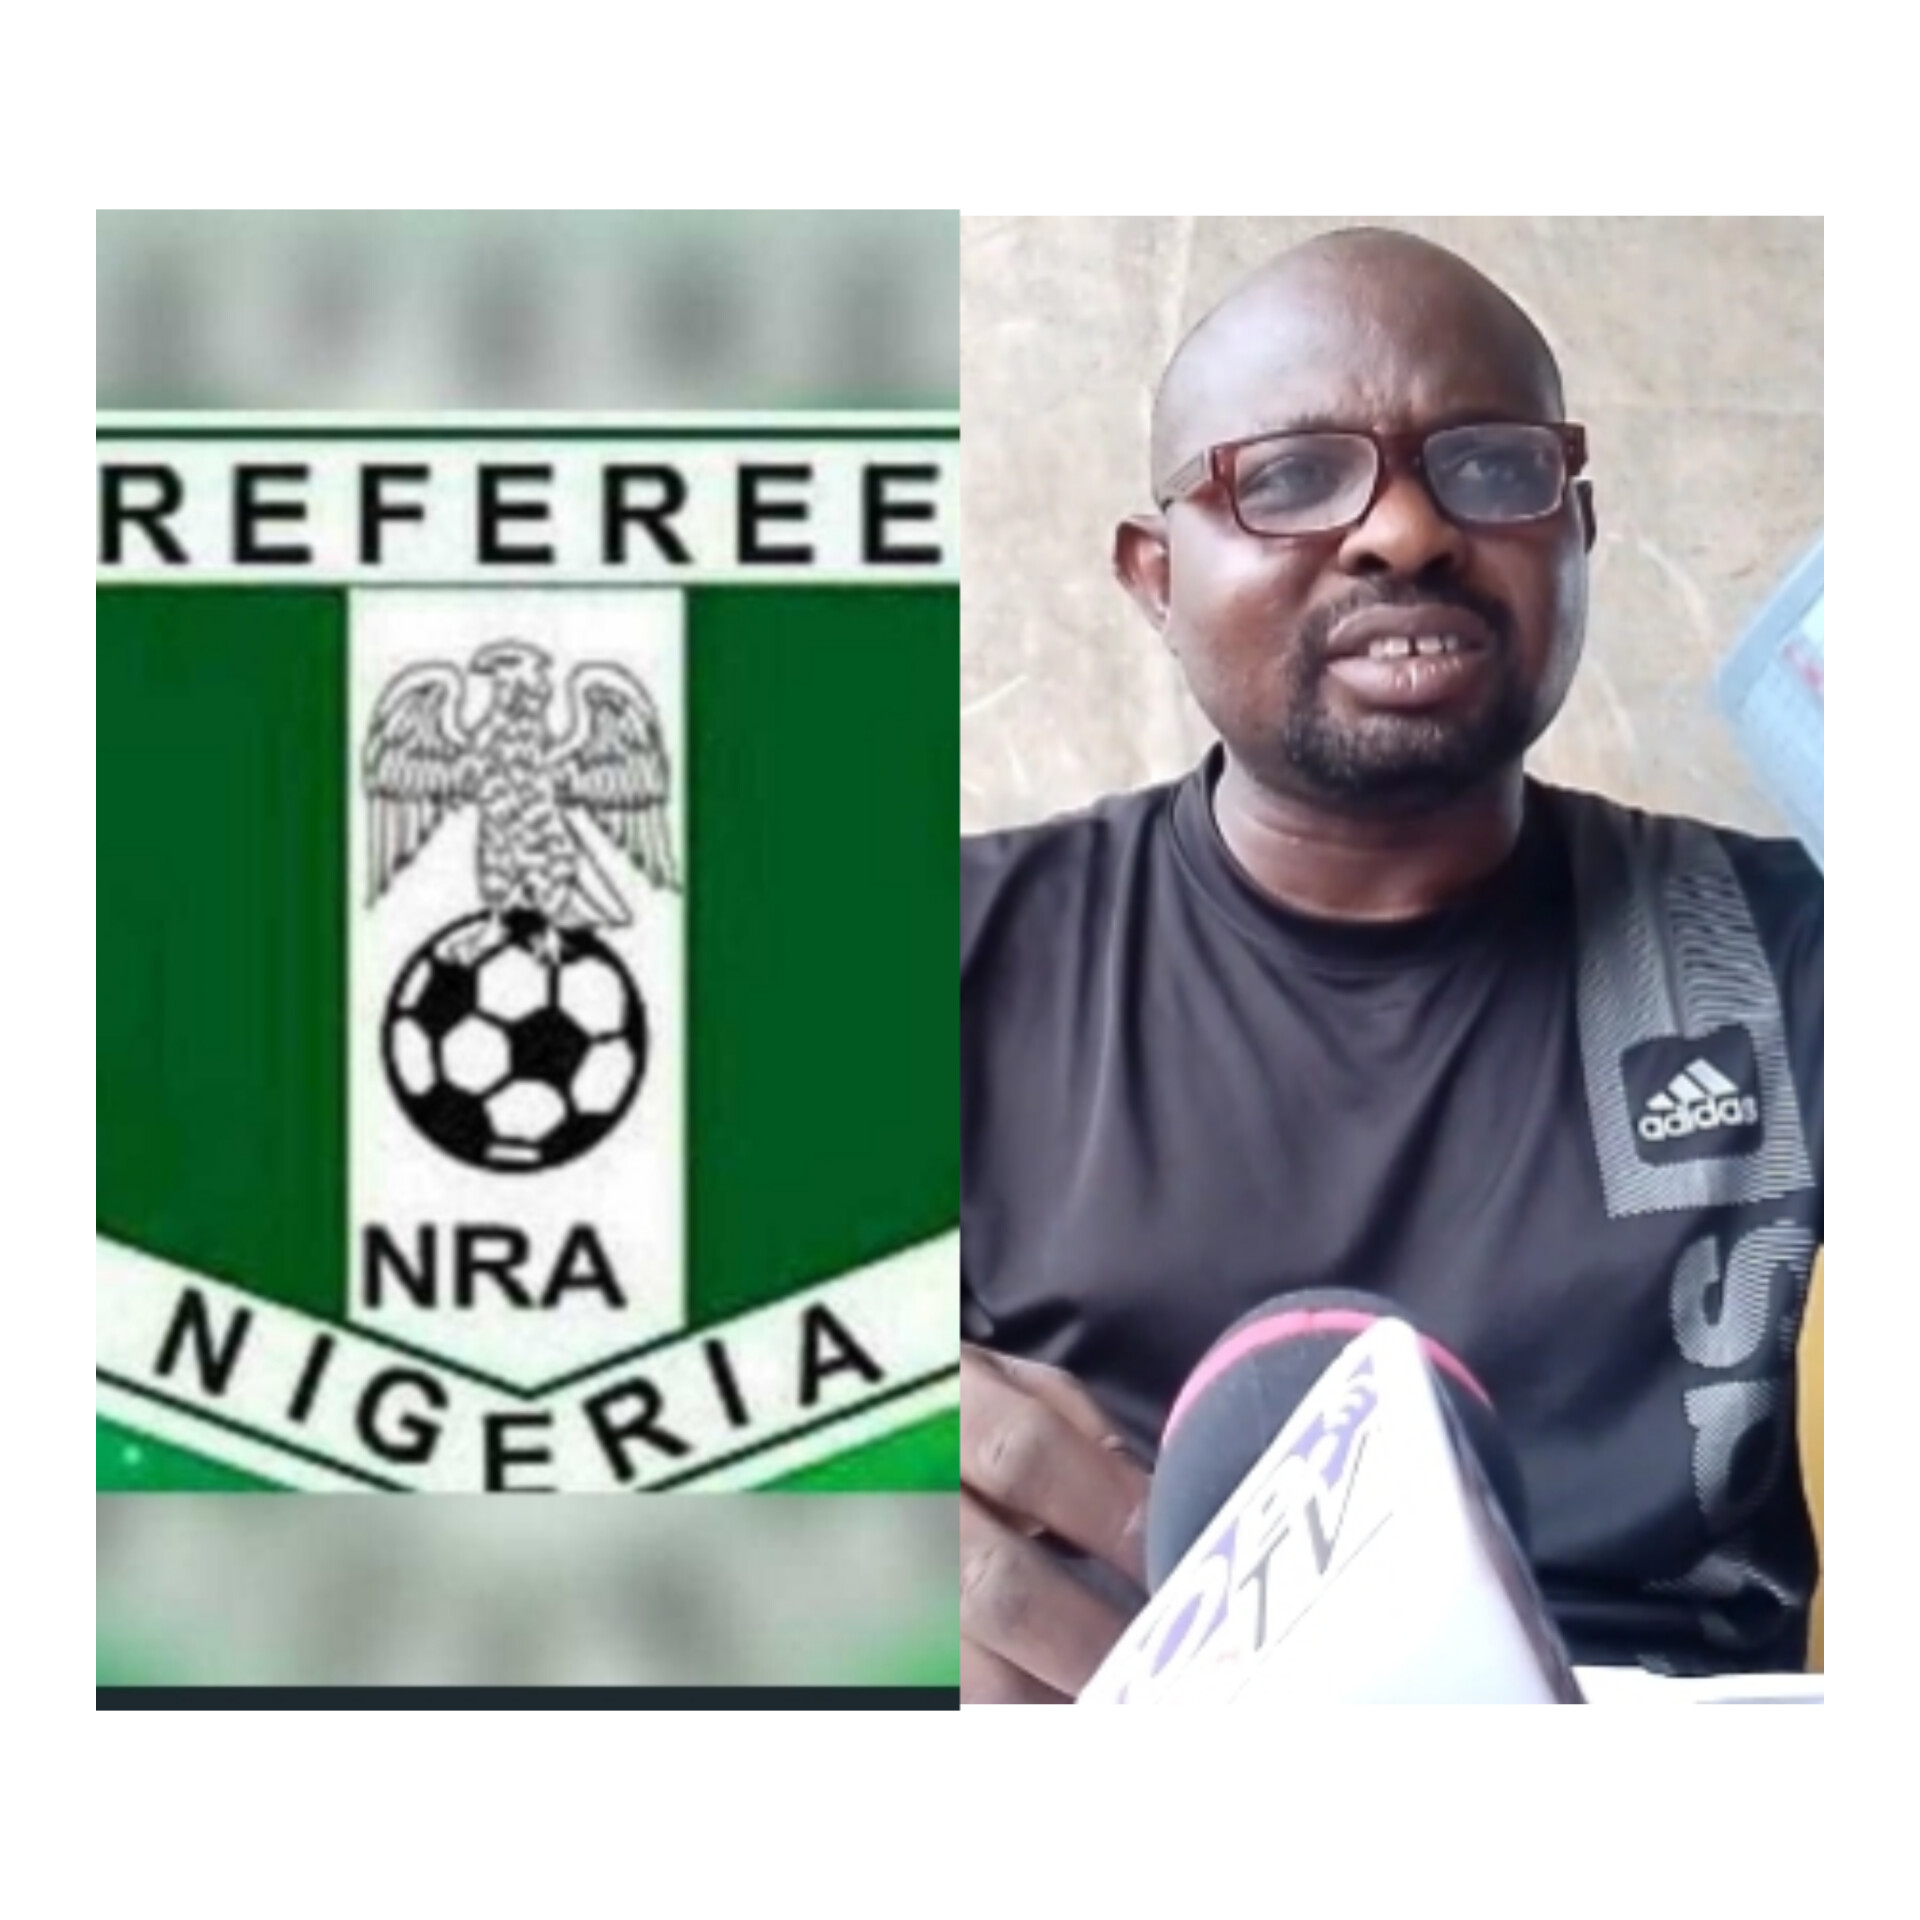 Ekiti Football Referees Council Boss, Oguntuase Debunks Allegation of Misconduct, Abuse of Office (Watch Video)